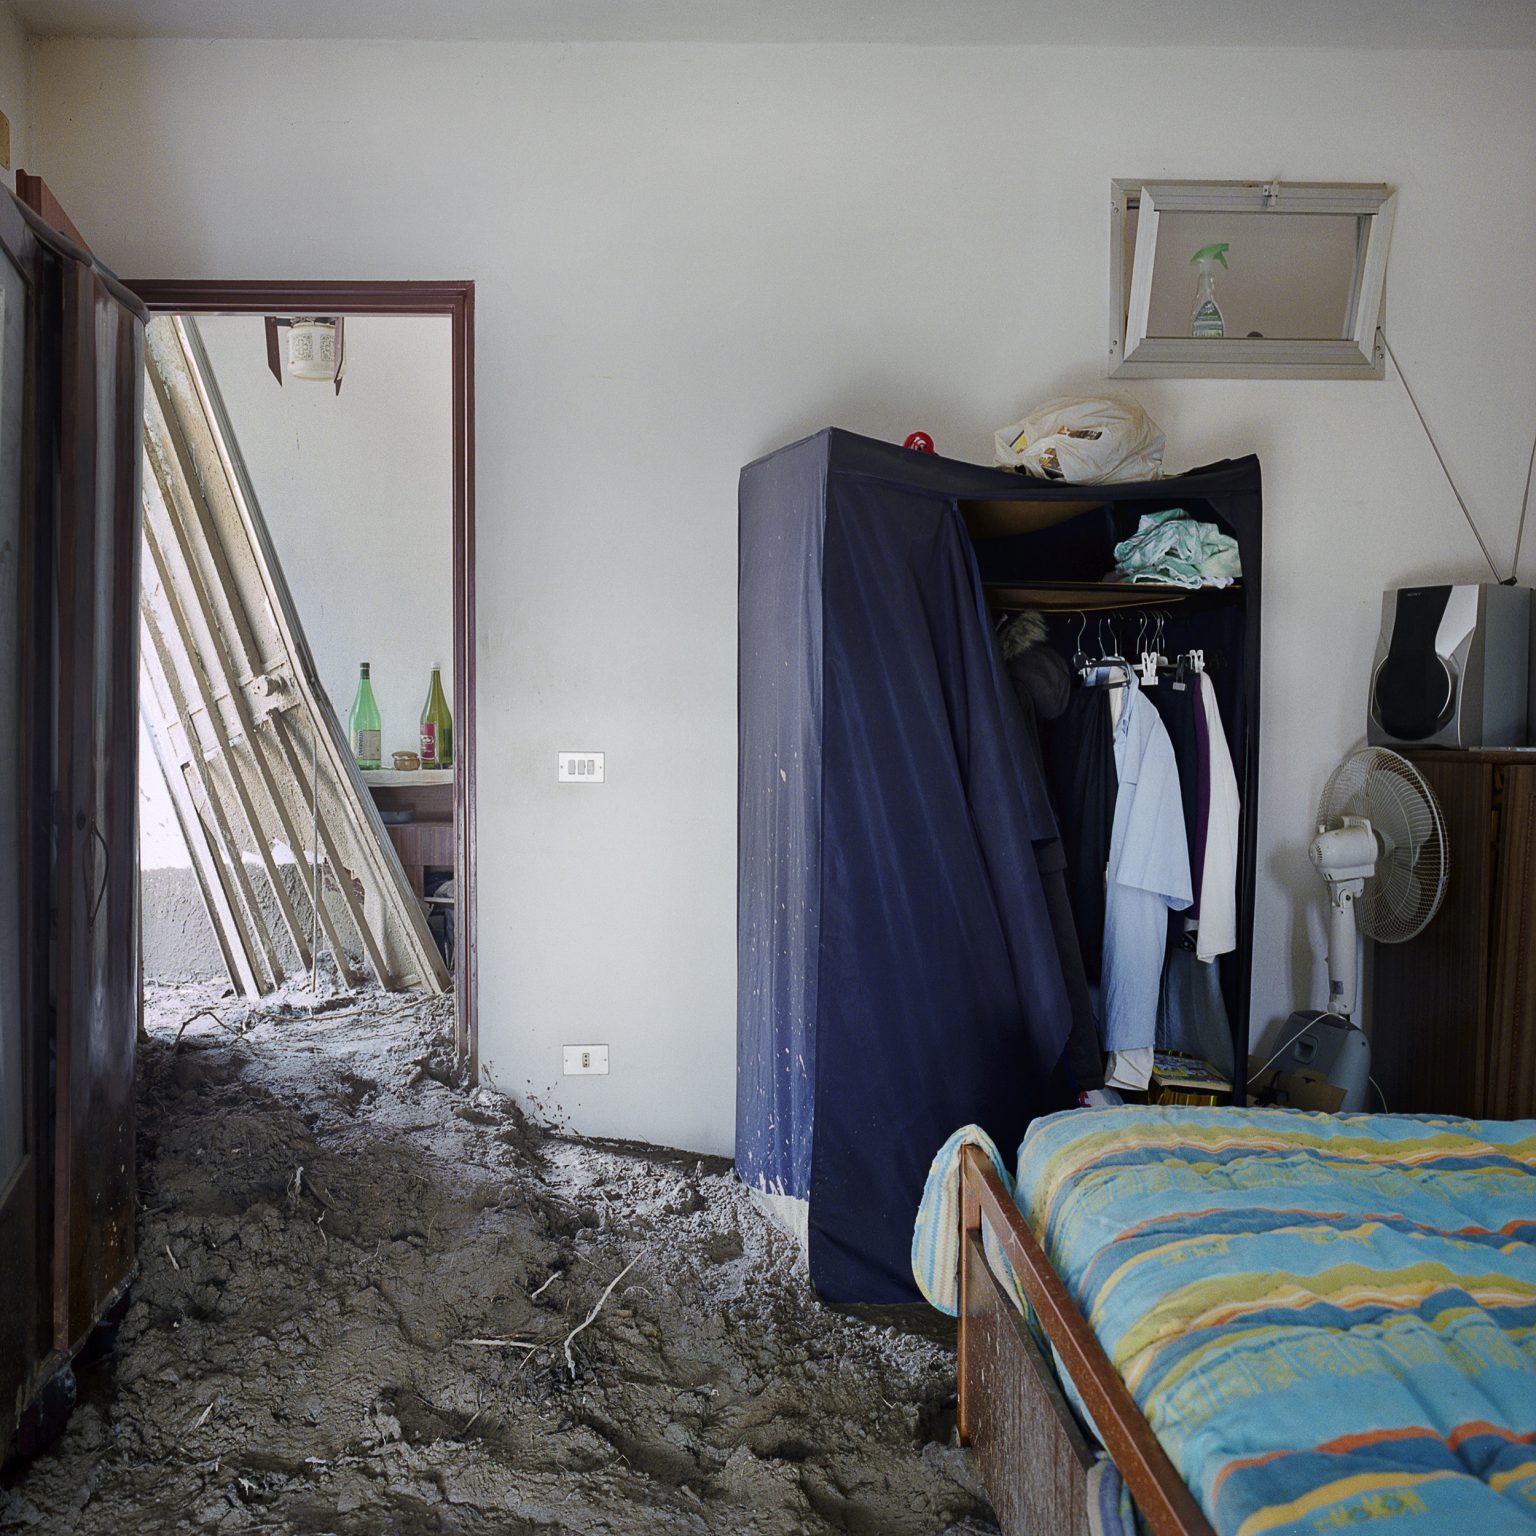 Scarcelli, Passo Como locality near Saponara, December 2011. In the bedroom of a house that was hit by a landslide.